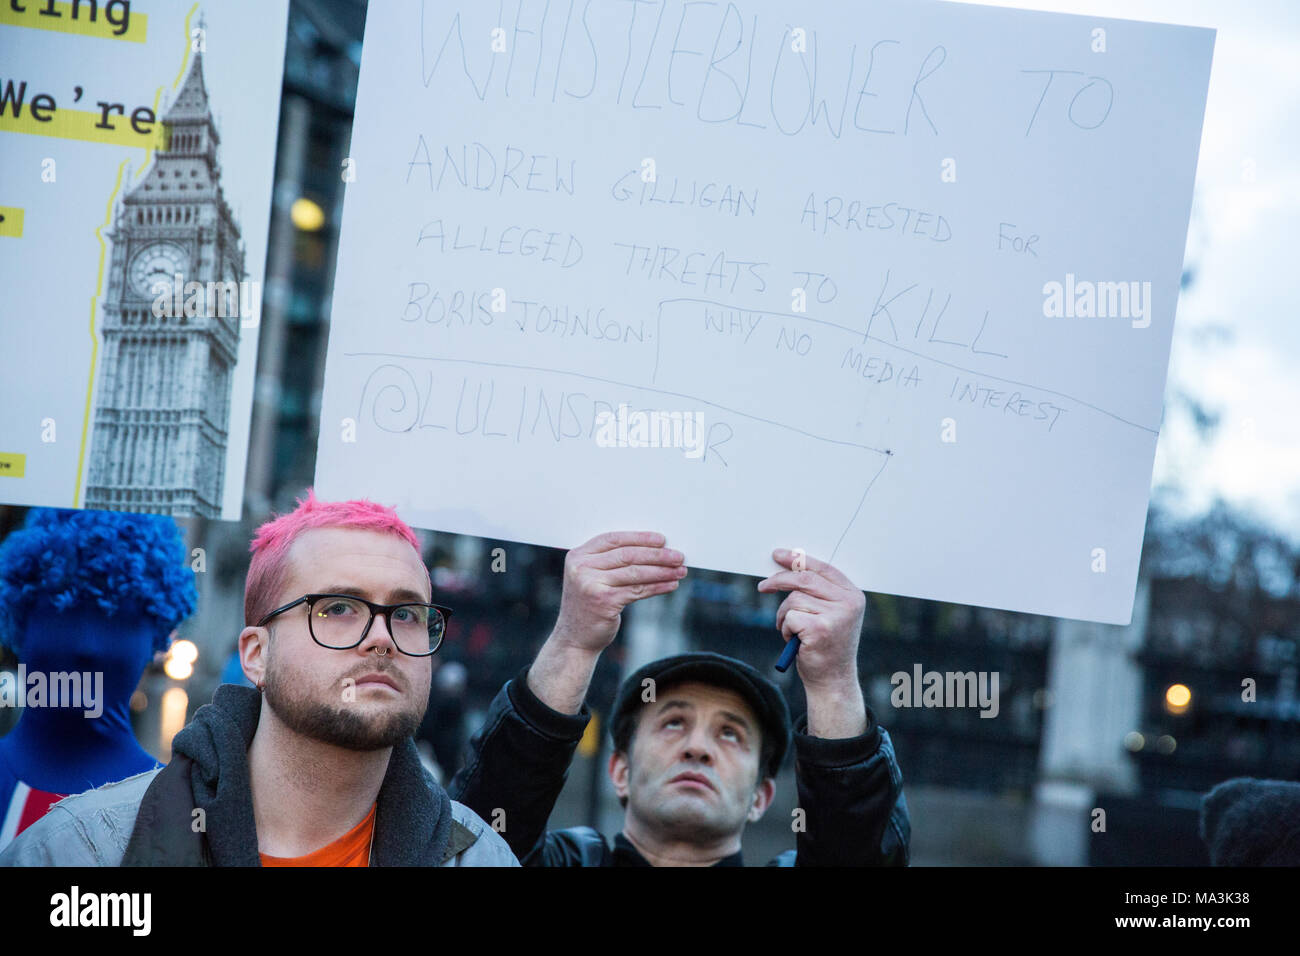 London, UK. 29th March, 2018. Cambridge Analytica whistleblower Christopher Wylie waits to address a rally in Parliament Square organised by the Fair Vote Project, which was set up to support whistleblowers like him and Shahmir Sanni and to ensure that evidence of unfair voting by either side in the referendum regarding the UK’s membership of the European Union is exposed. Credit: Mark Kerrison/Alamy Live News Stock Photo